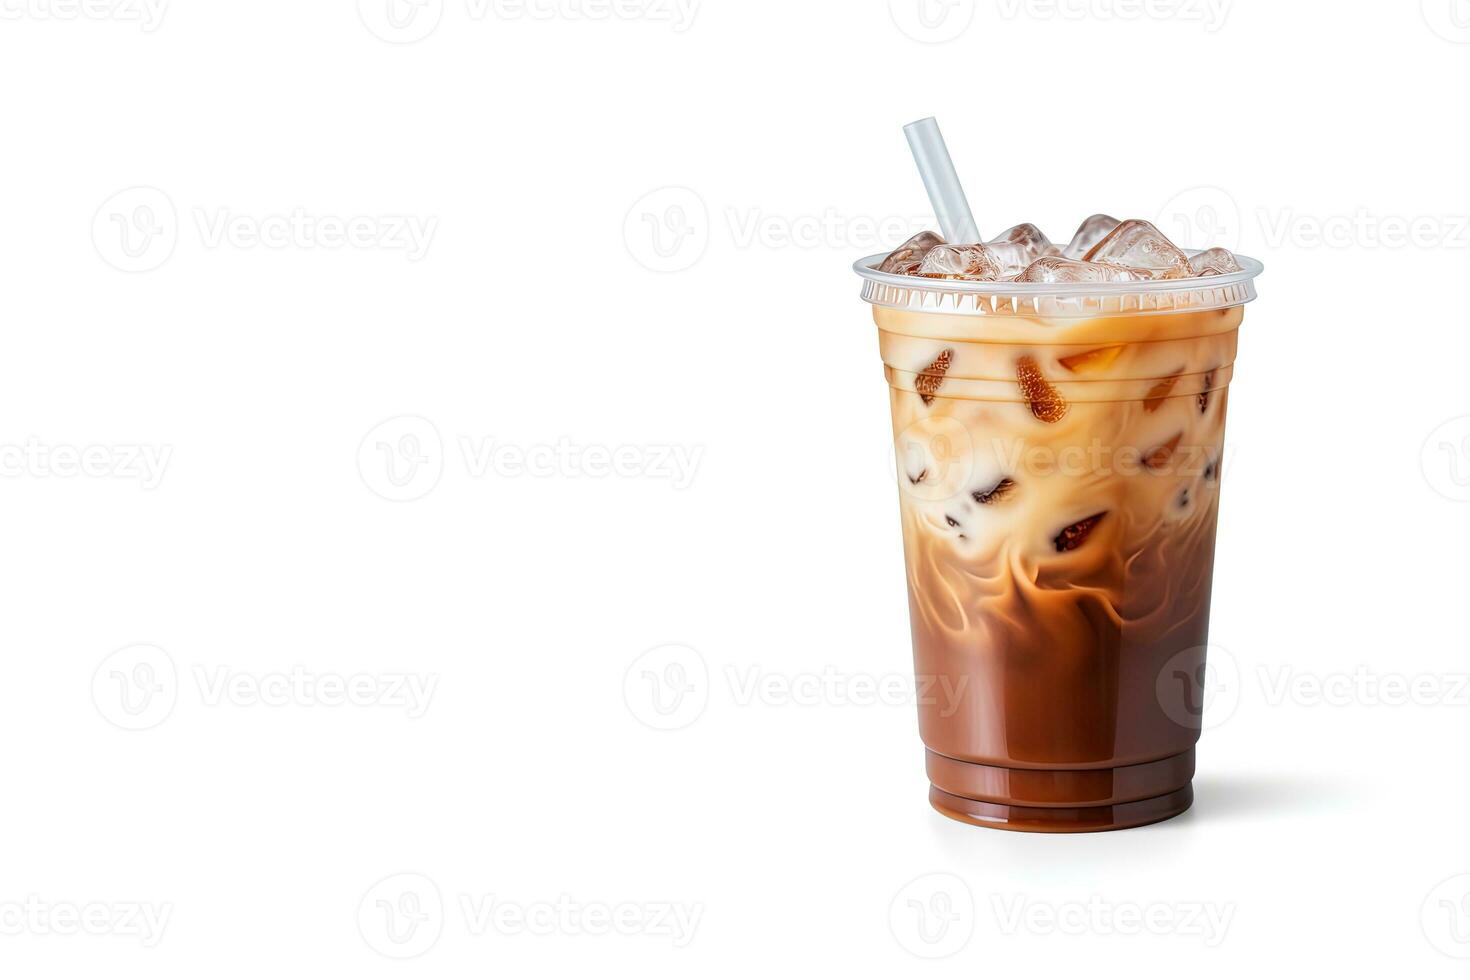 https://static.vecteezy.com/system/resources/previews/027/471/227/non_2x/iced-coffee-in-plastic-takeaway-glass-isolated-on-white-background-with-copy-space-ai-generated-photo.jpg